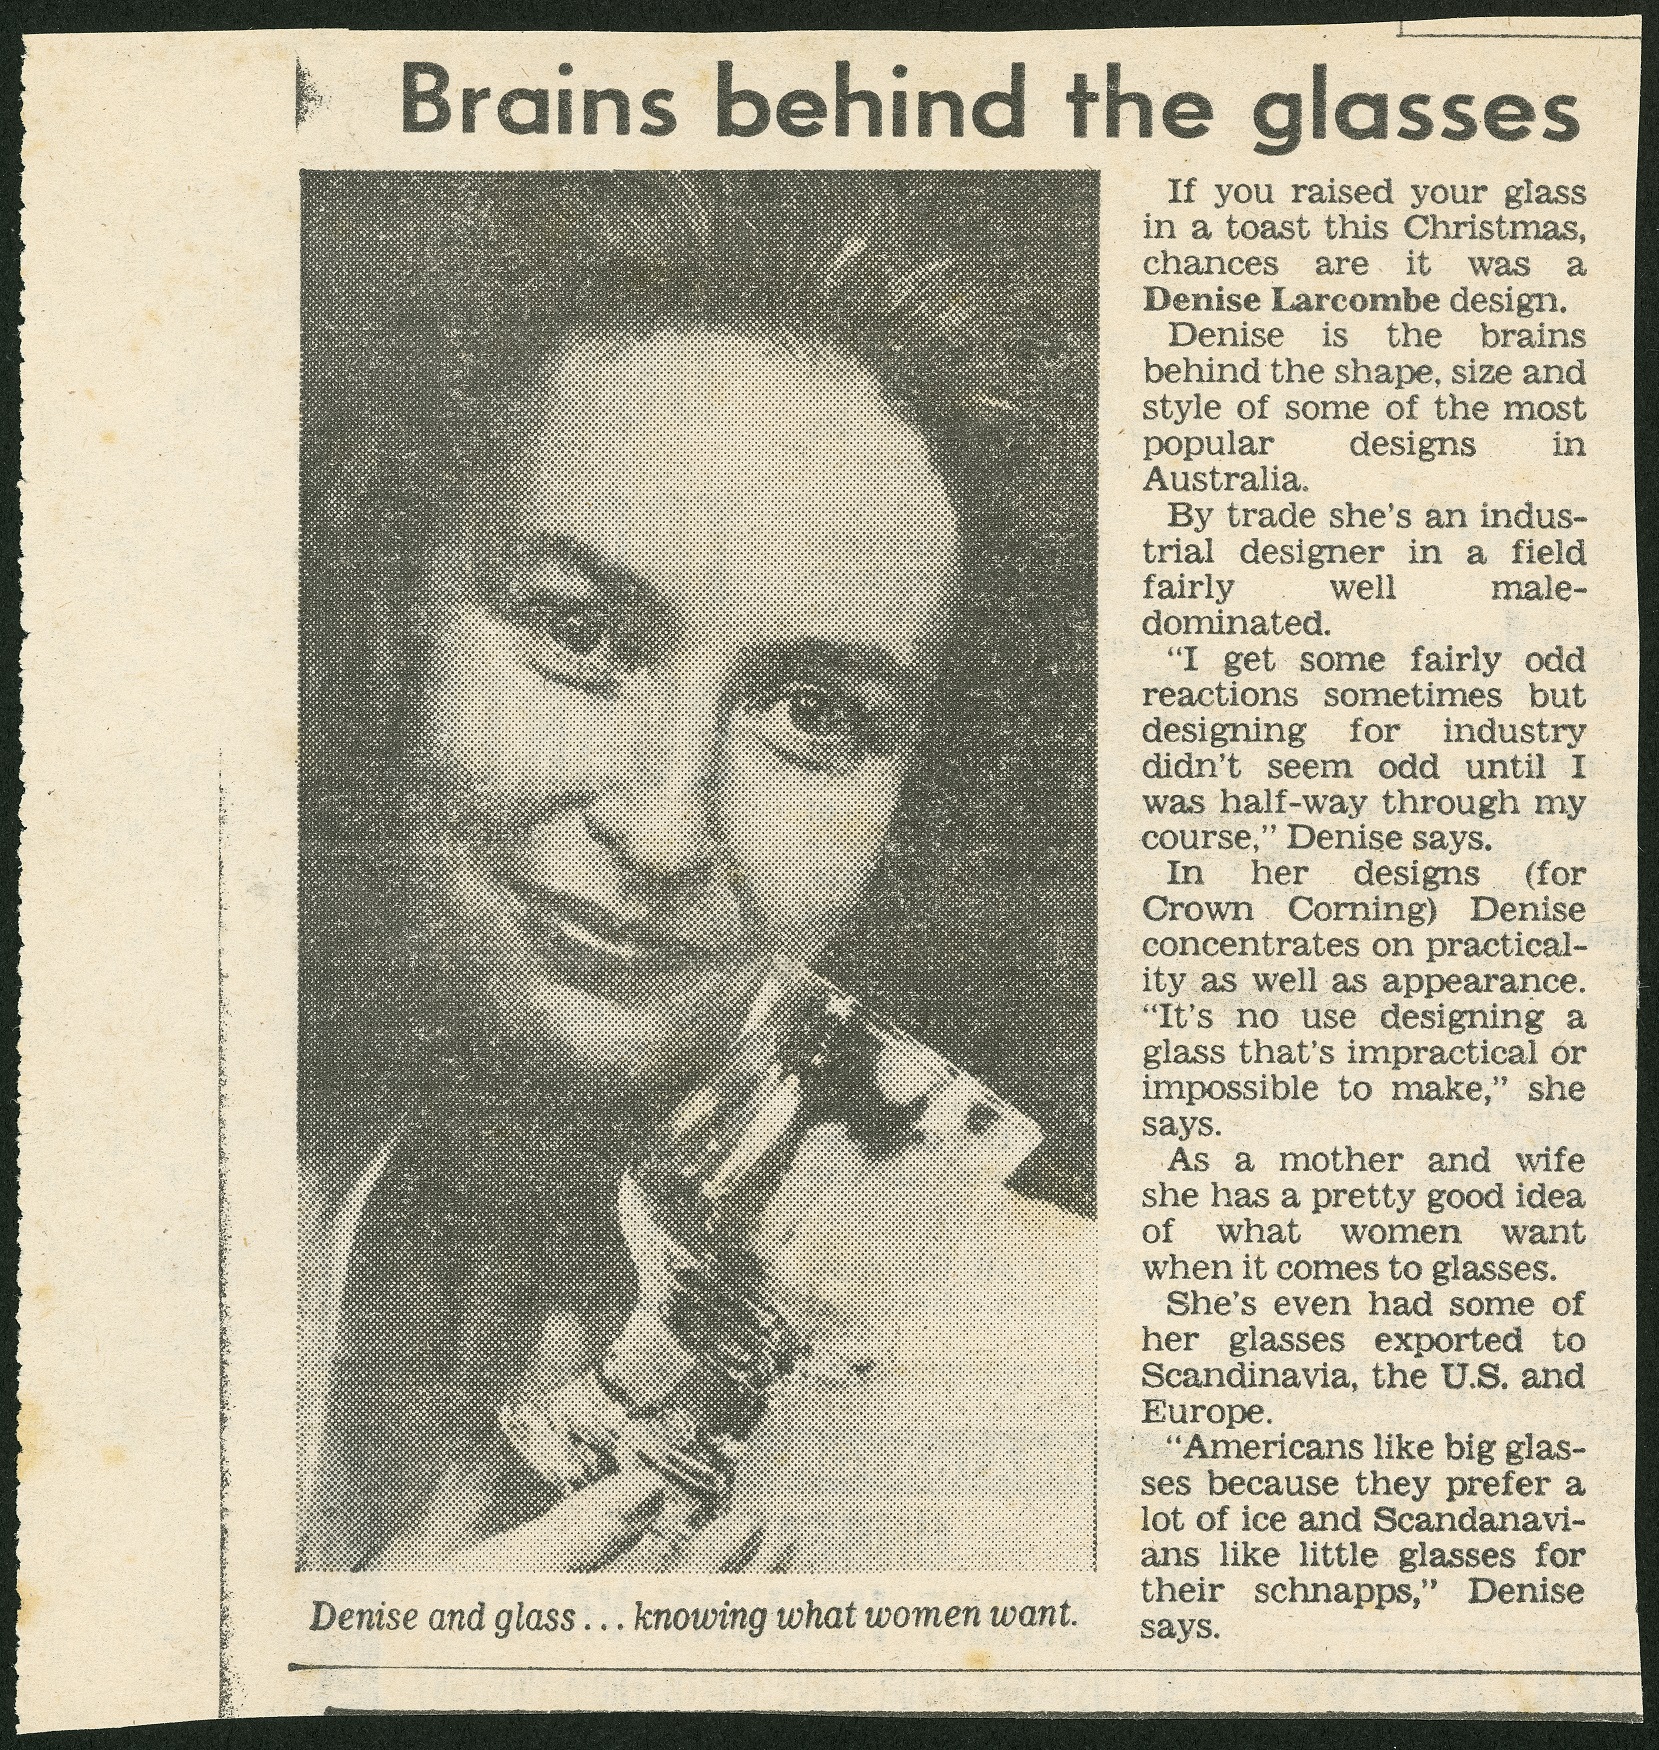 Newspaper article with a photograph of a woman and the title 'Brains behind the glass'.